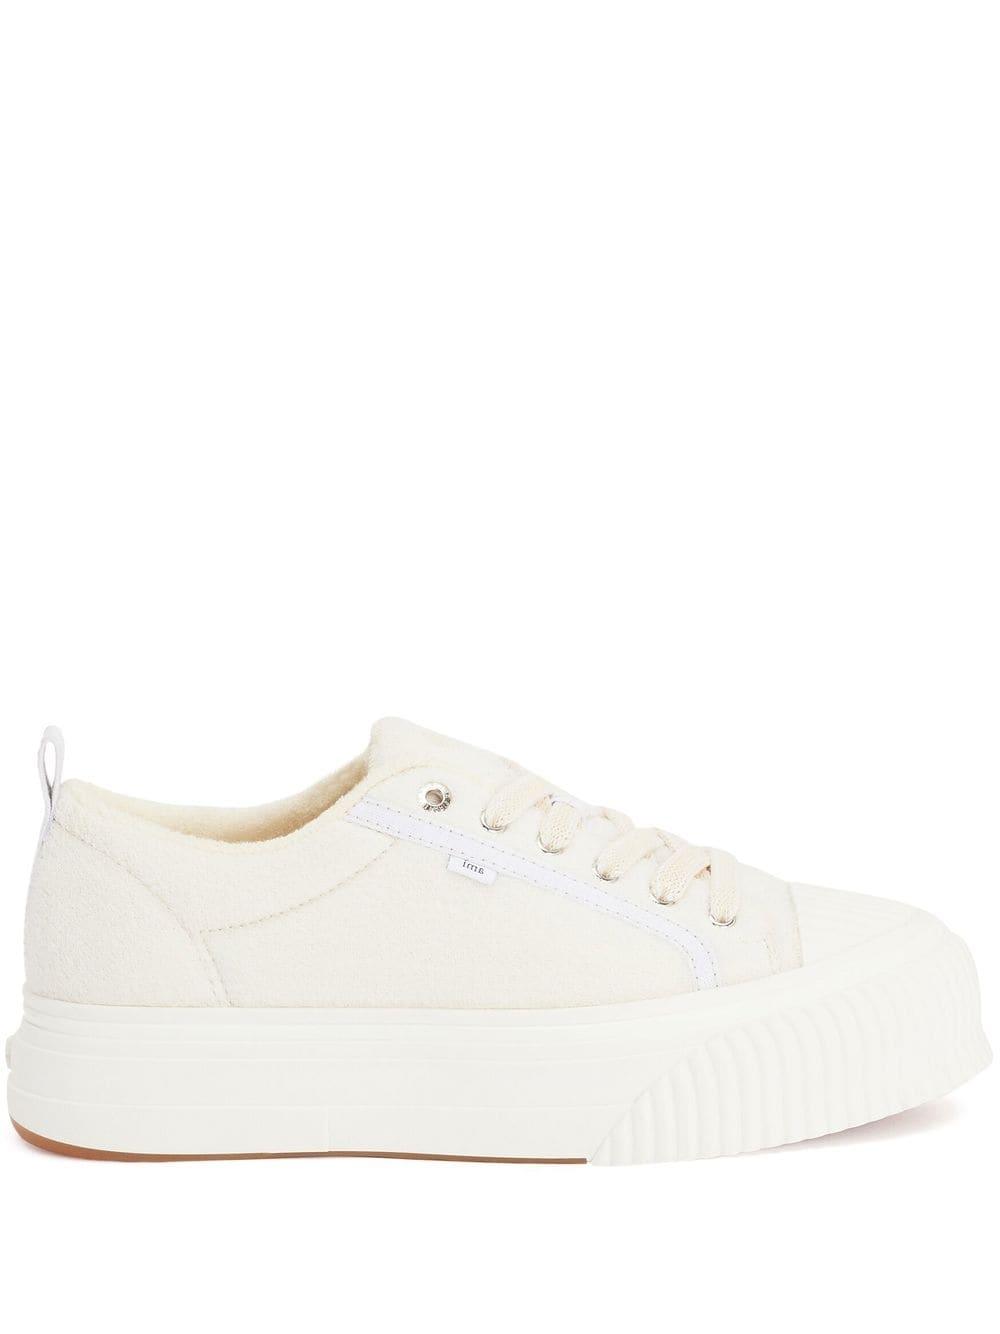 Ami Paris Oversized Sole Low-top Sneakers in White | Lyst